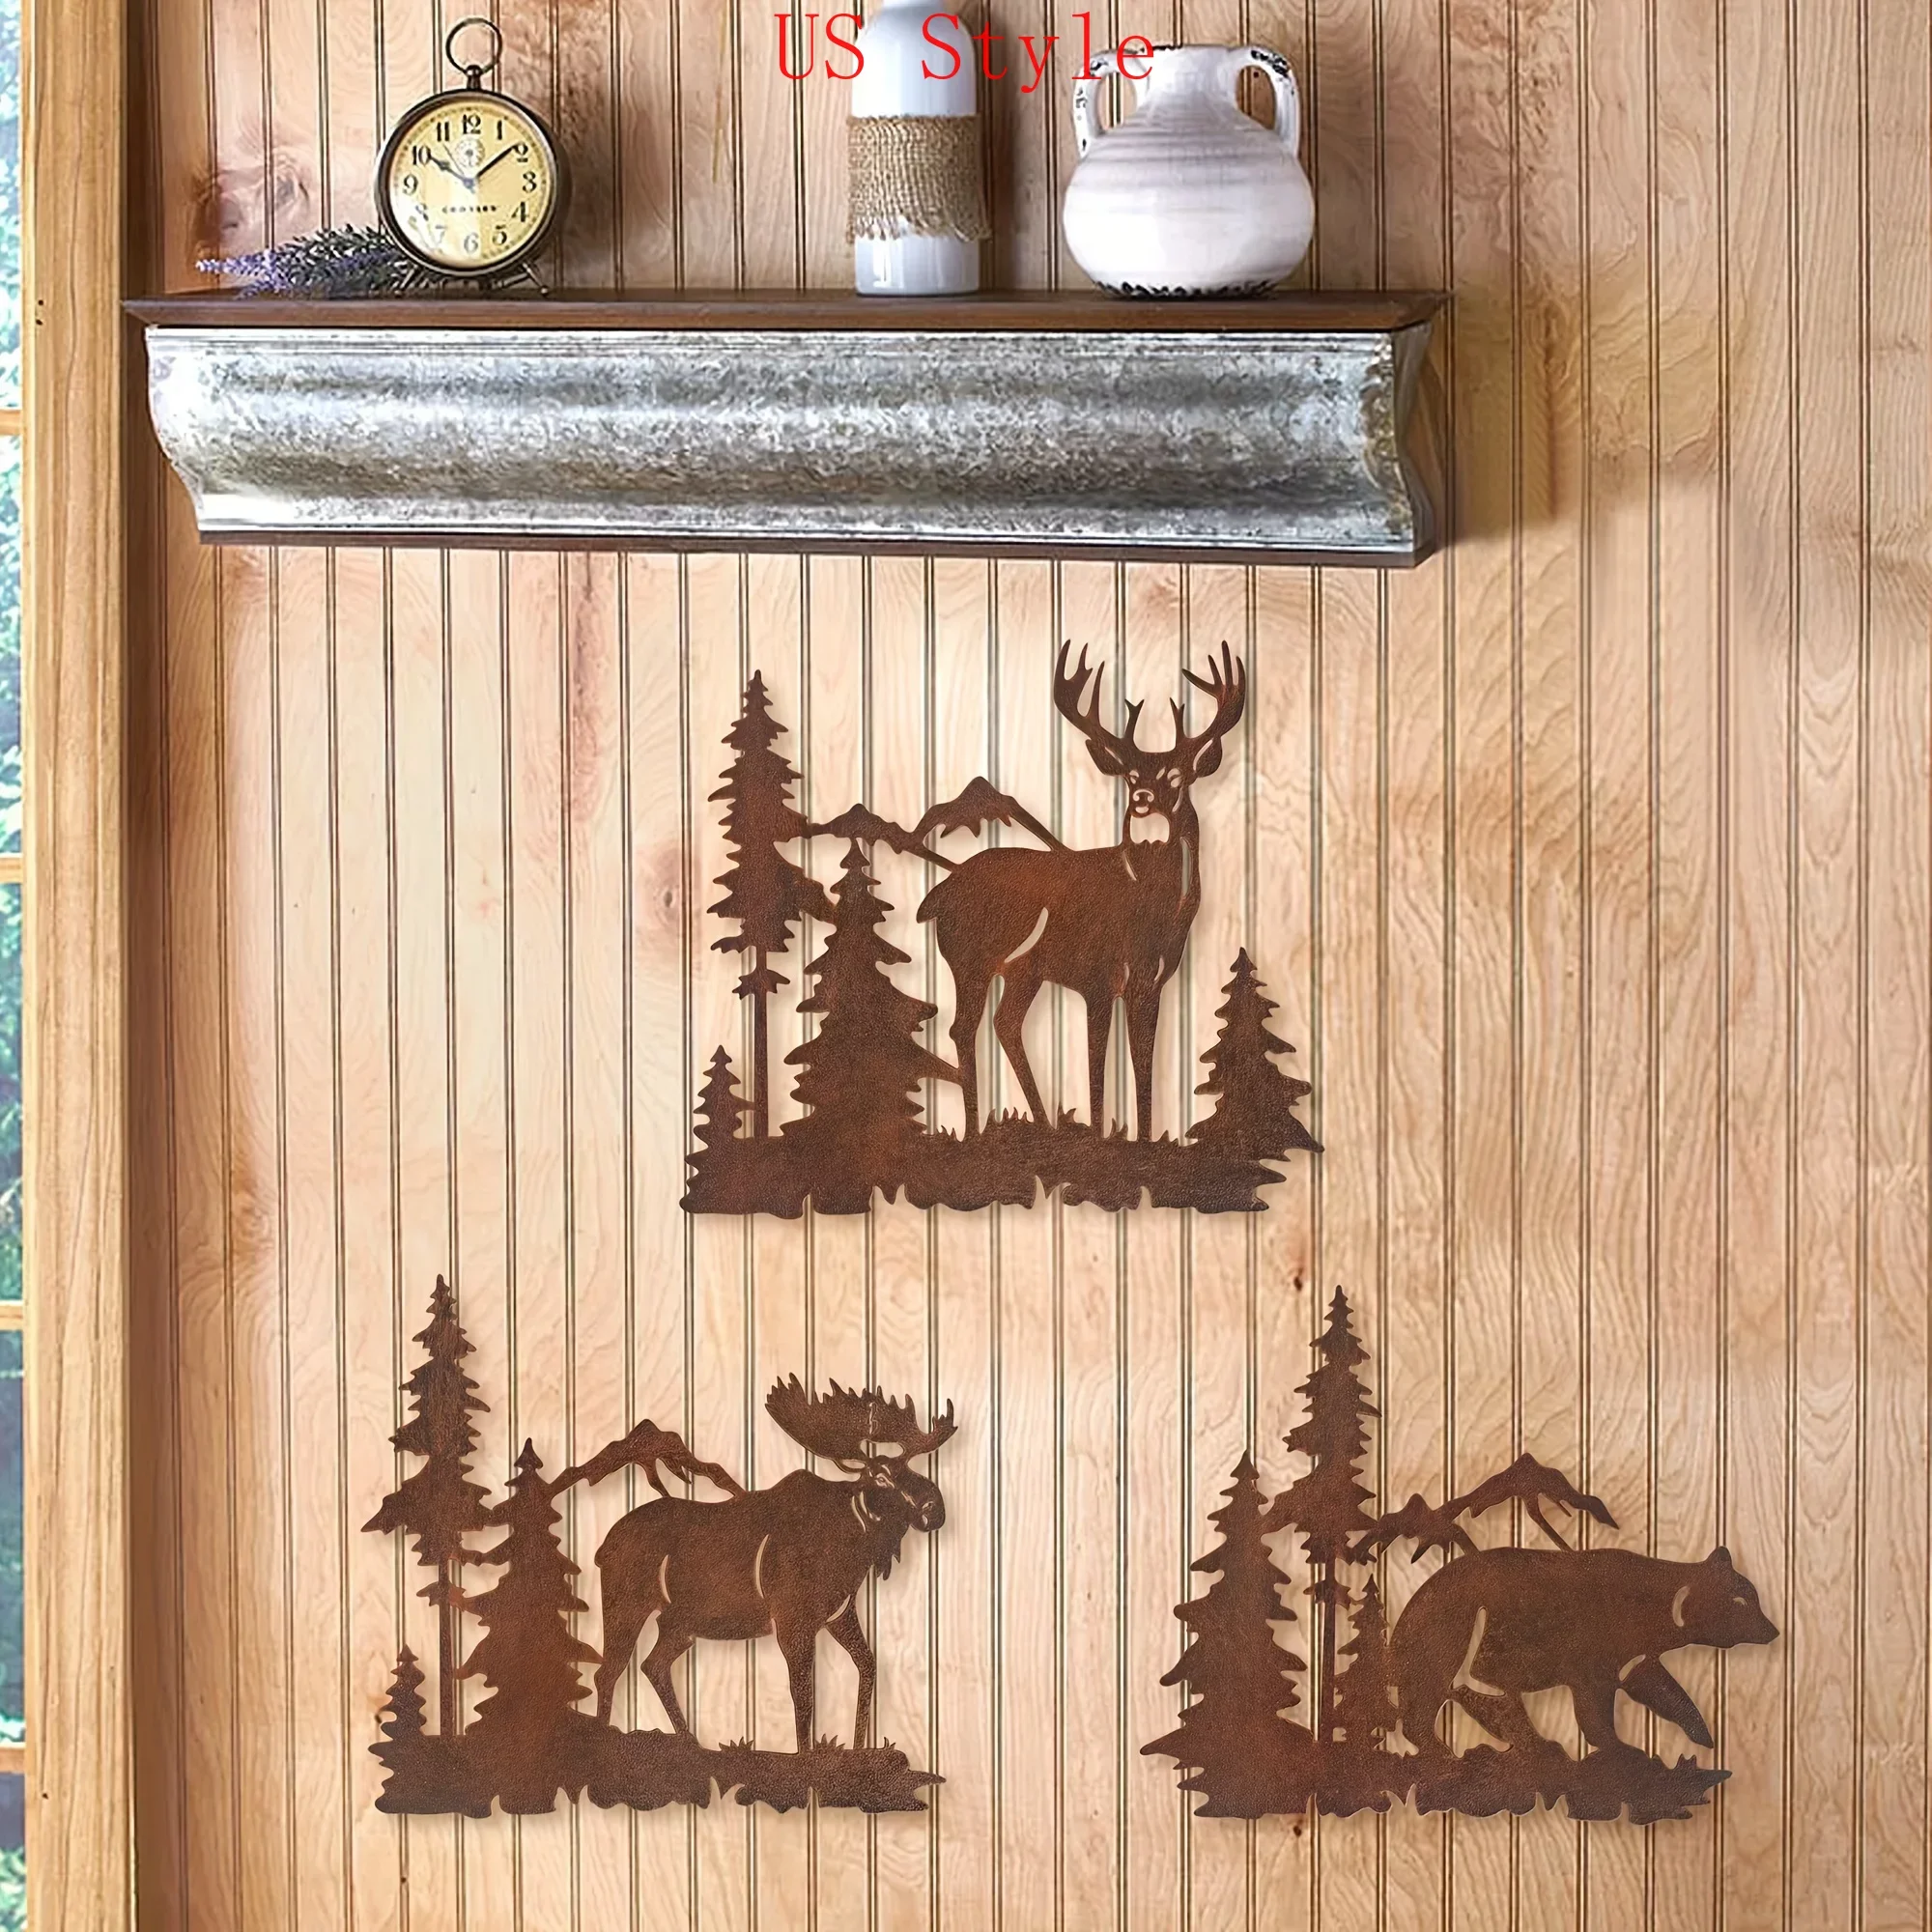 

1pc, Metal Wall Hanging Art Decor Deer Bear Moose in The Forest Pine Tree Set of 3 Rustic Concise Decoration Wall Mounted Decor